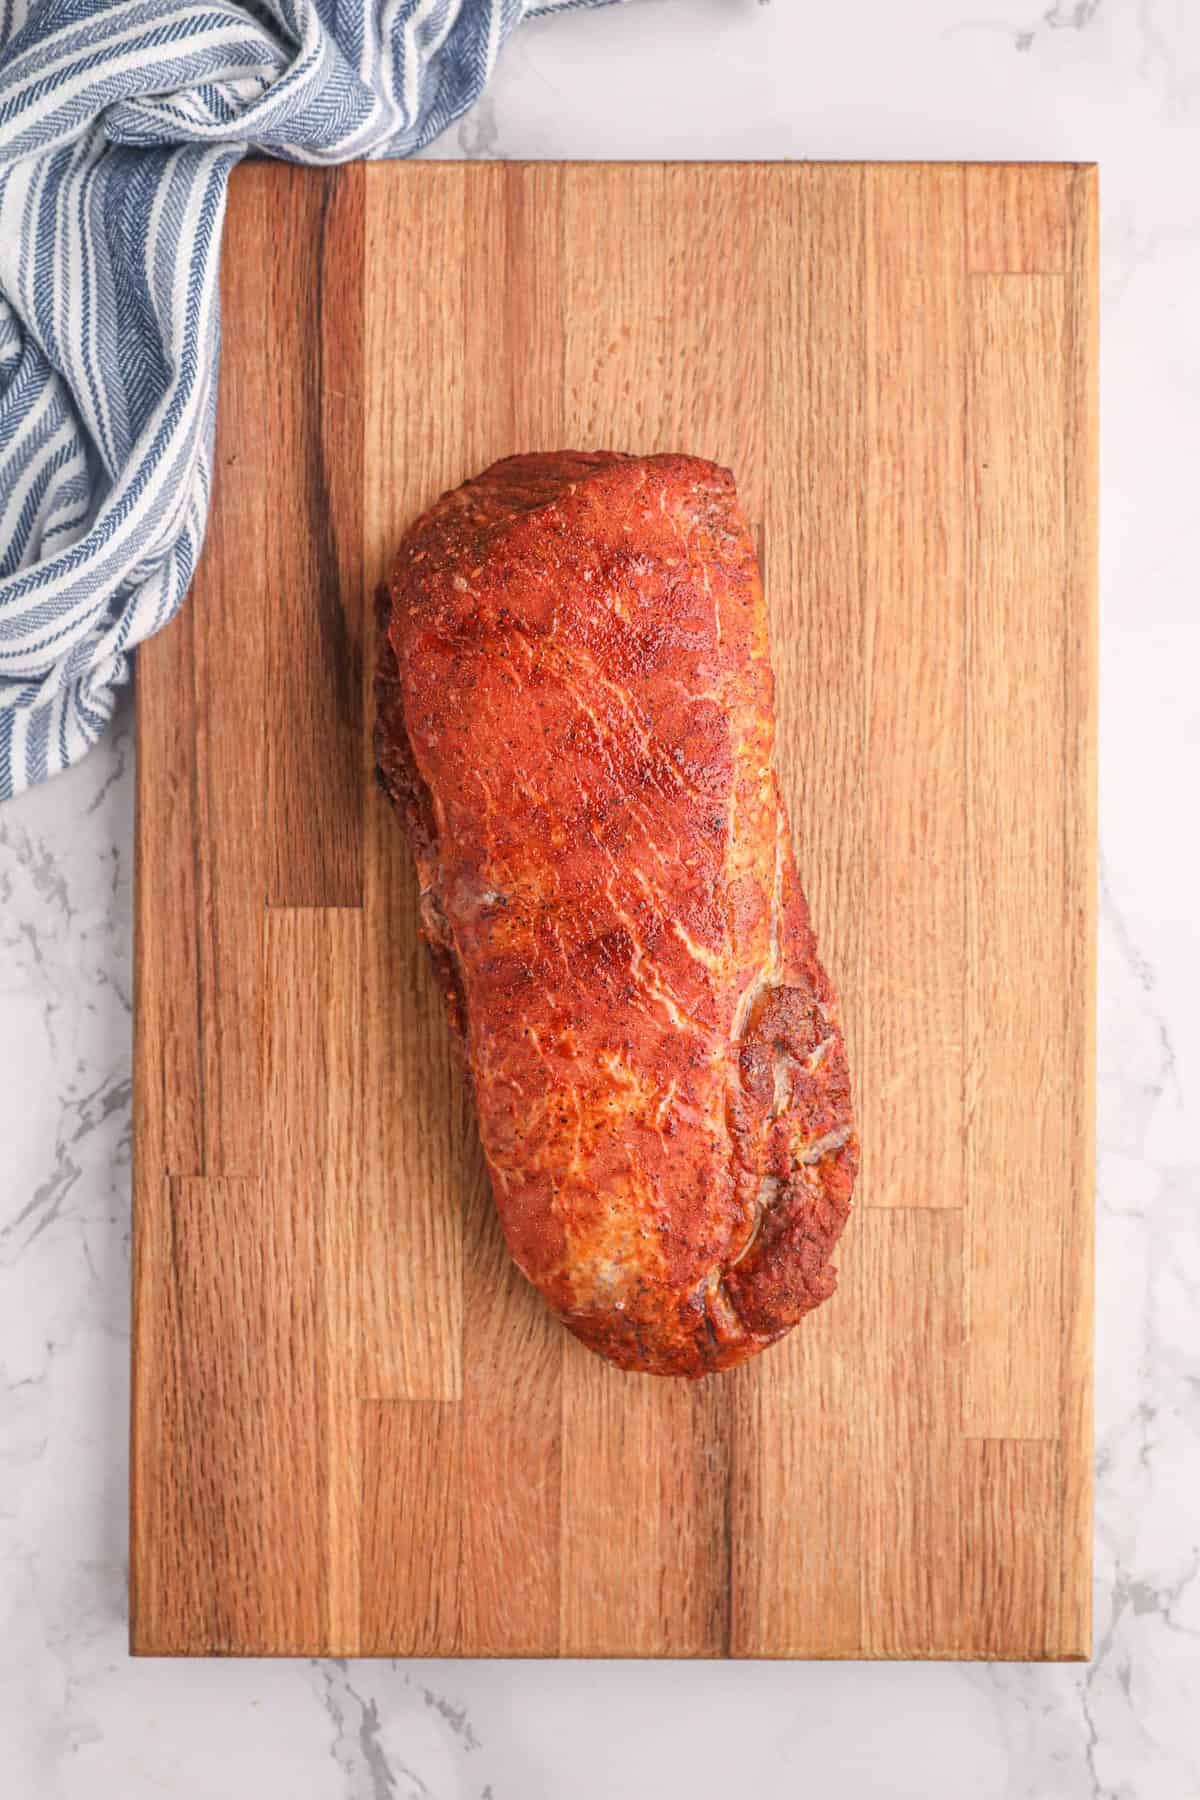 Allowing Grilled Pork Loin to cool on wooden cutting board before slicing